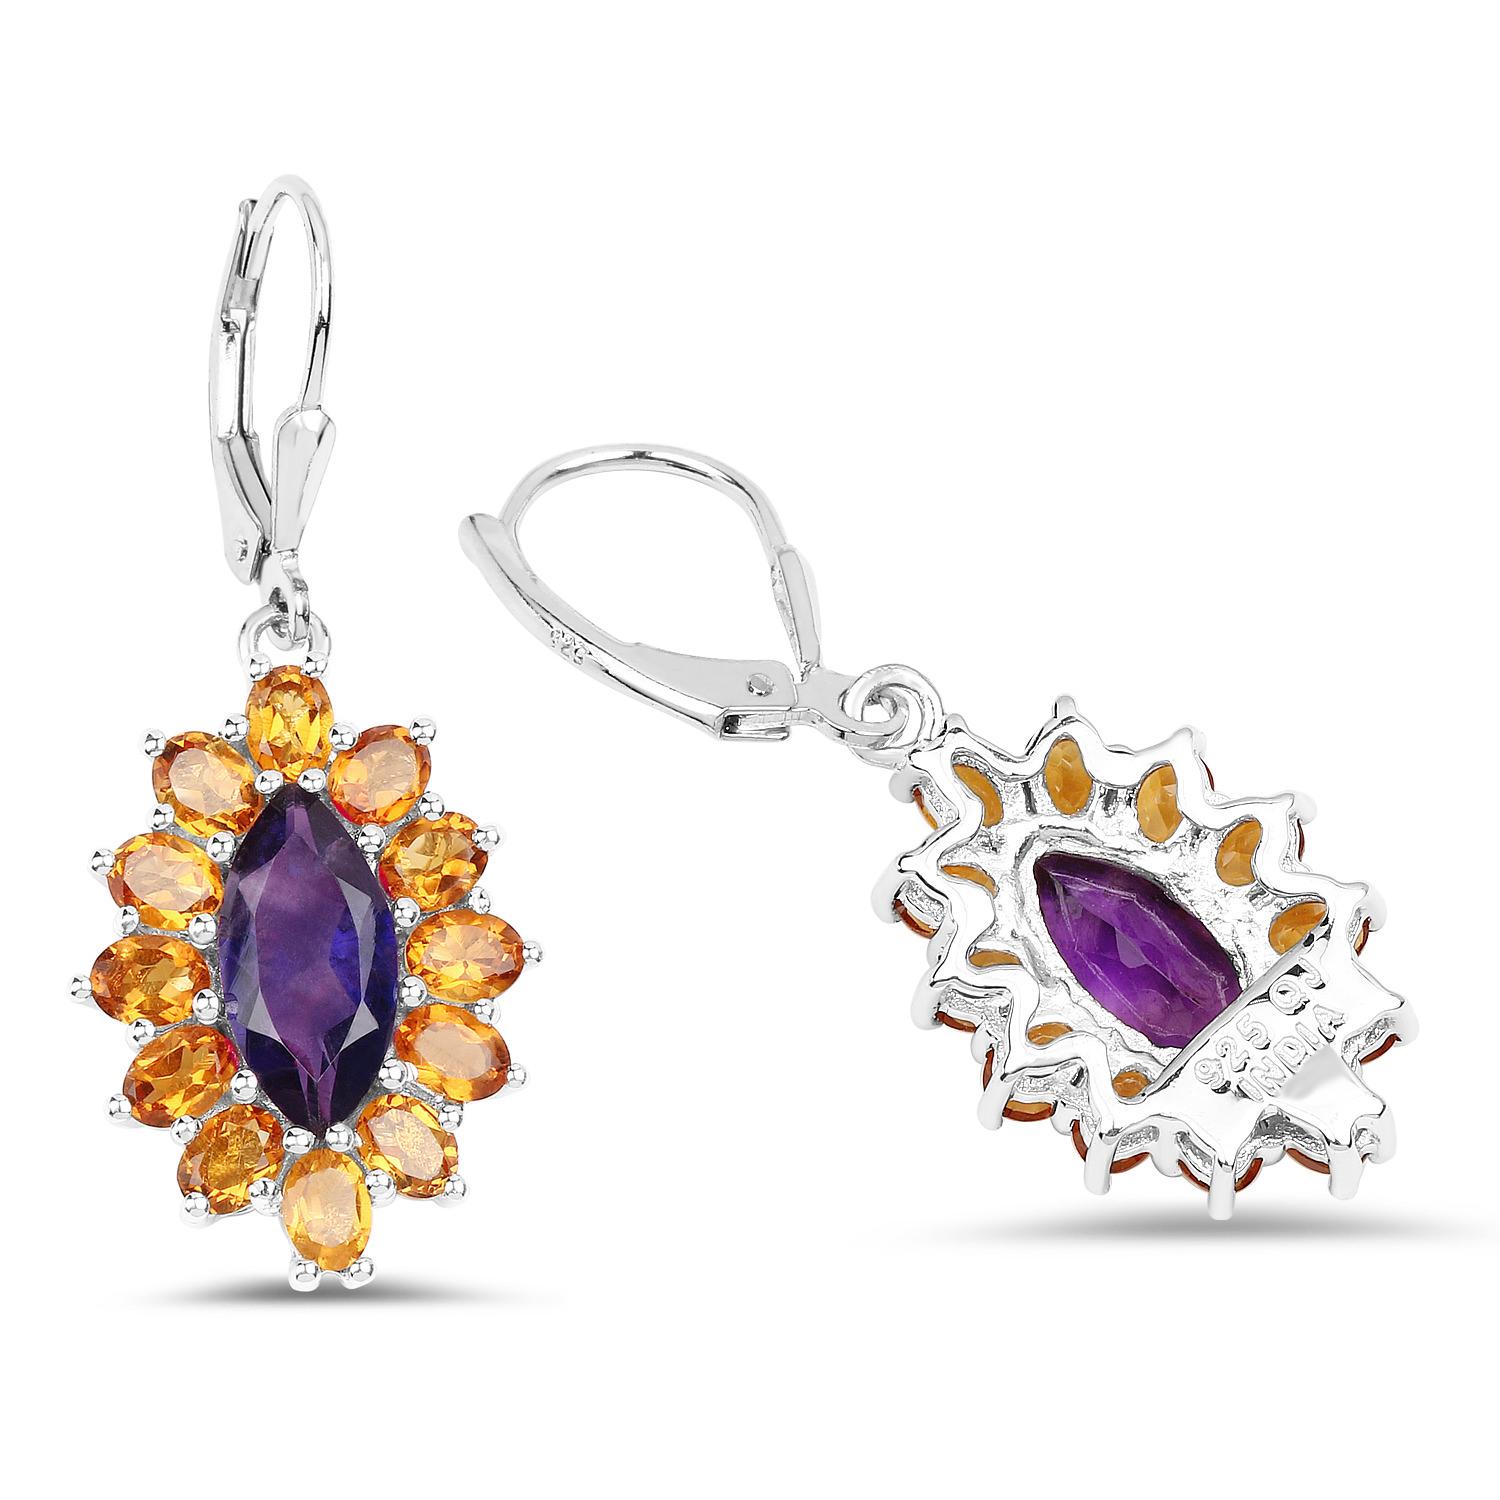 It comes with the appraisal by GIA GG/AJP
Beautiful Madeira Citrine & Amethyst Dangle Earrings Sterling Silver
Madeira Citrine = 3.85 Carats
Cut: Oval
Amethyst = 2.70 Carats
Cut: Marquise
Metal: Sterling Silver
Rhodium Plated
Height: 6.5 mm
Width: